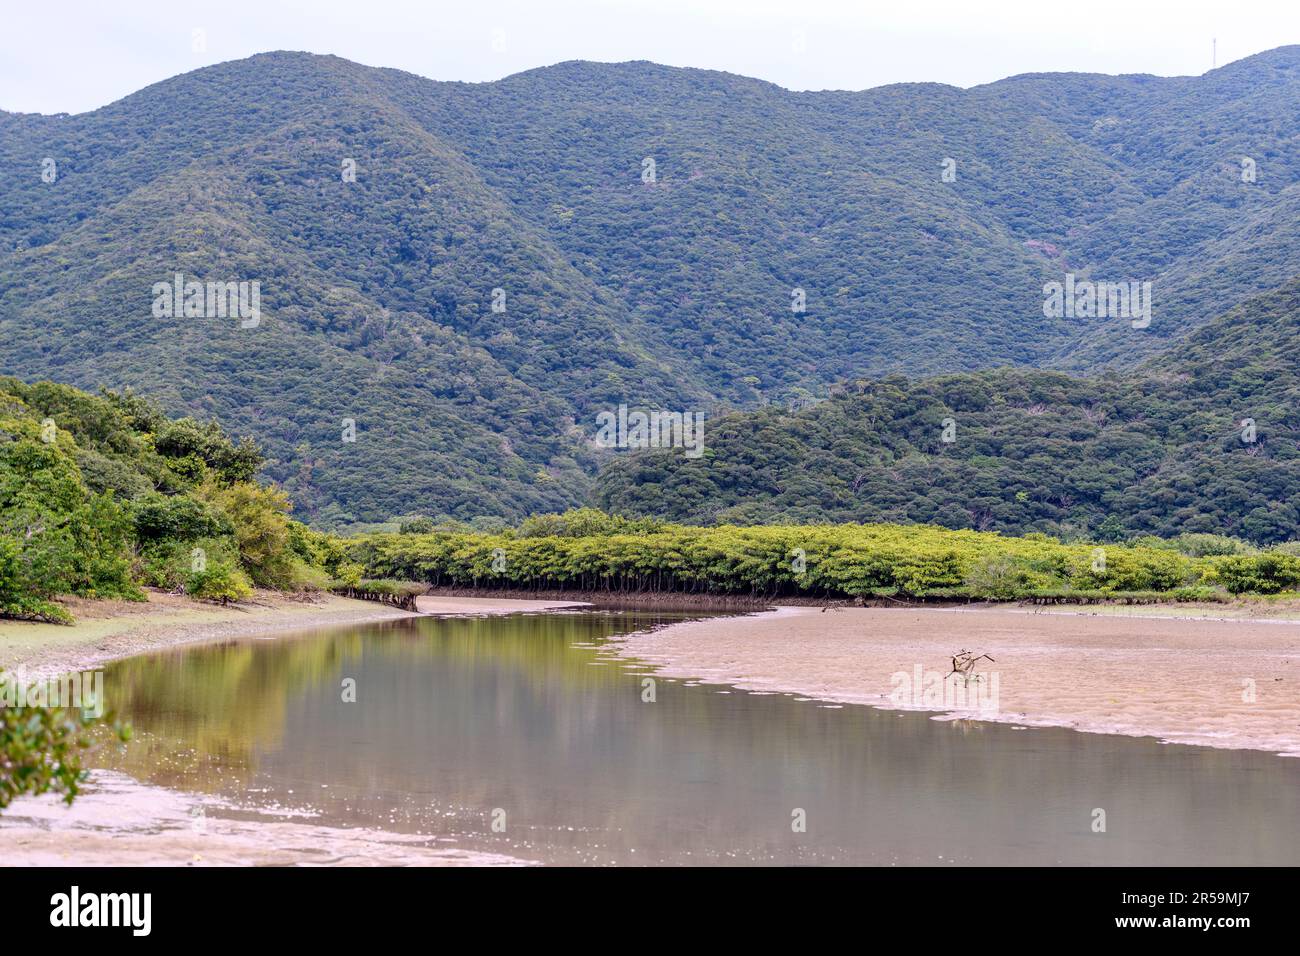 Amami Mangrove Primeval Forest (Amami Islands, southern Japan) is situated where the rivers Sumiyo and Yakugachi meet the ocean. The primary rainfores Stock Photo